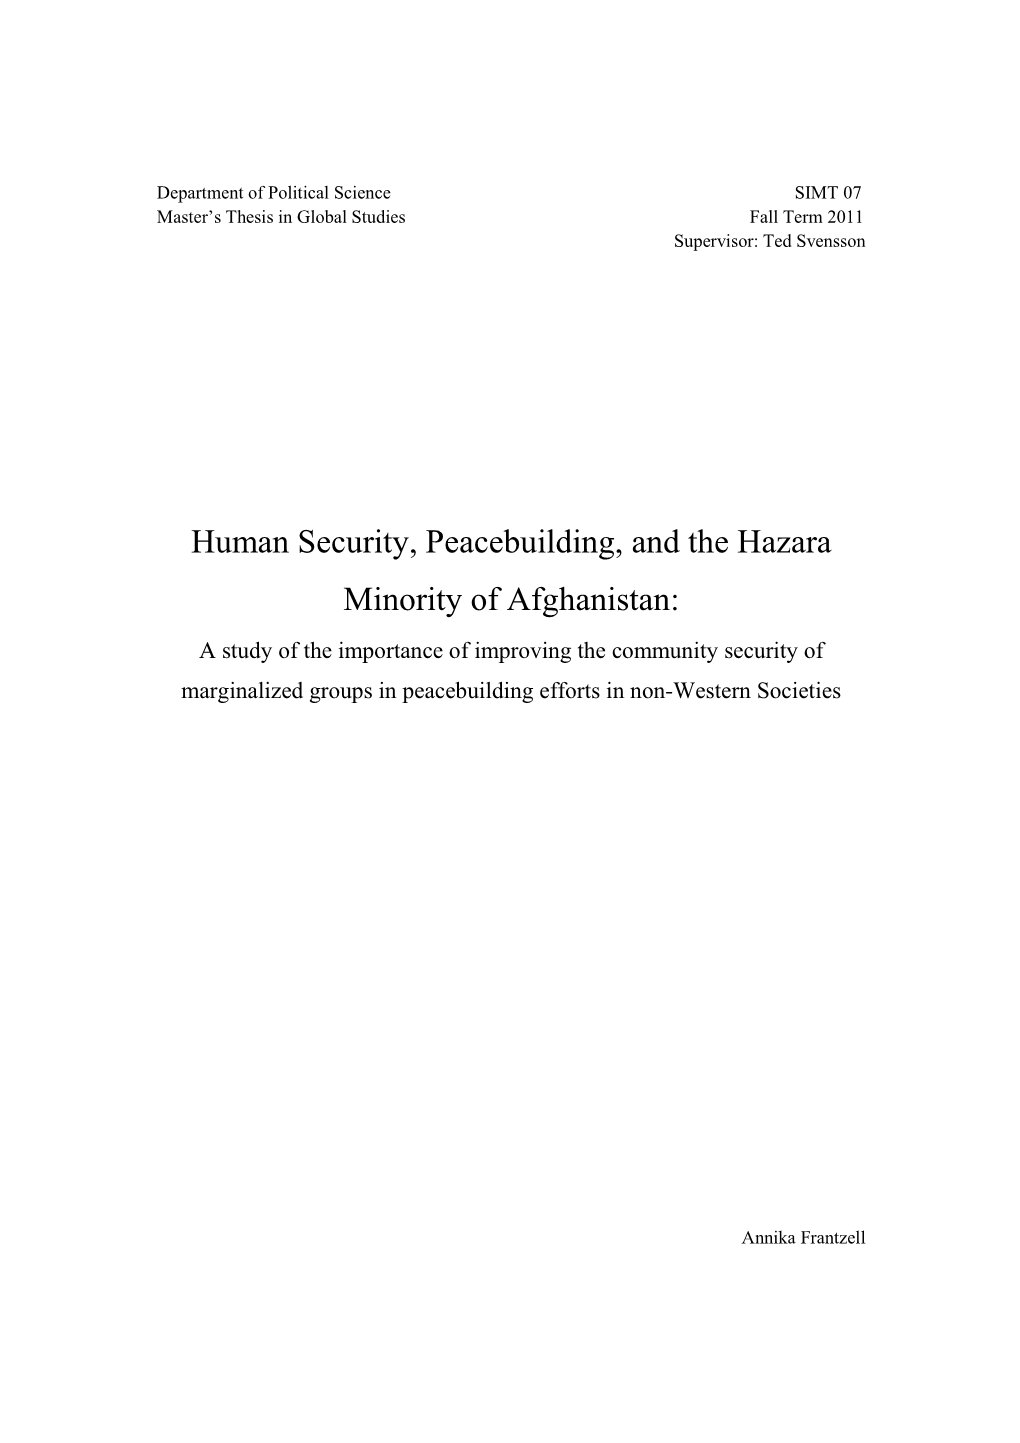 Human Security, Peacebuilding, and The